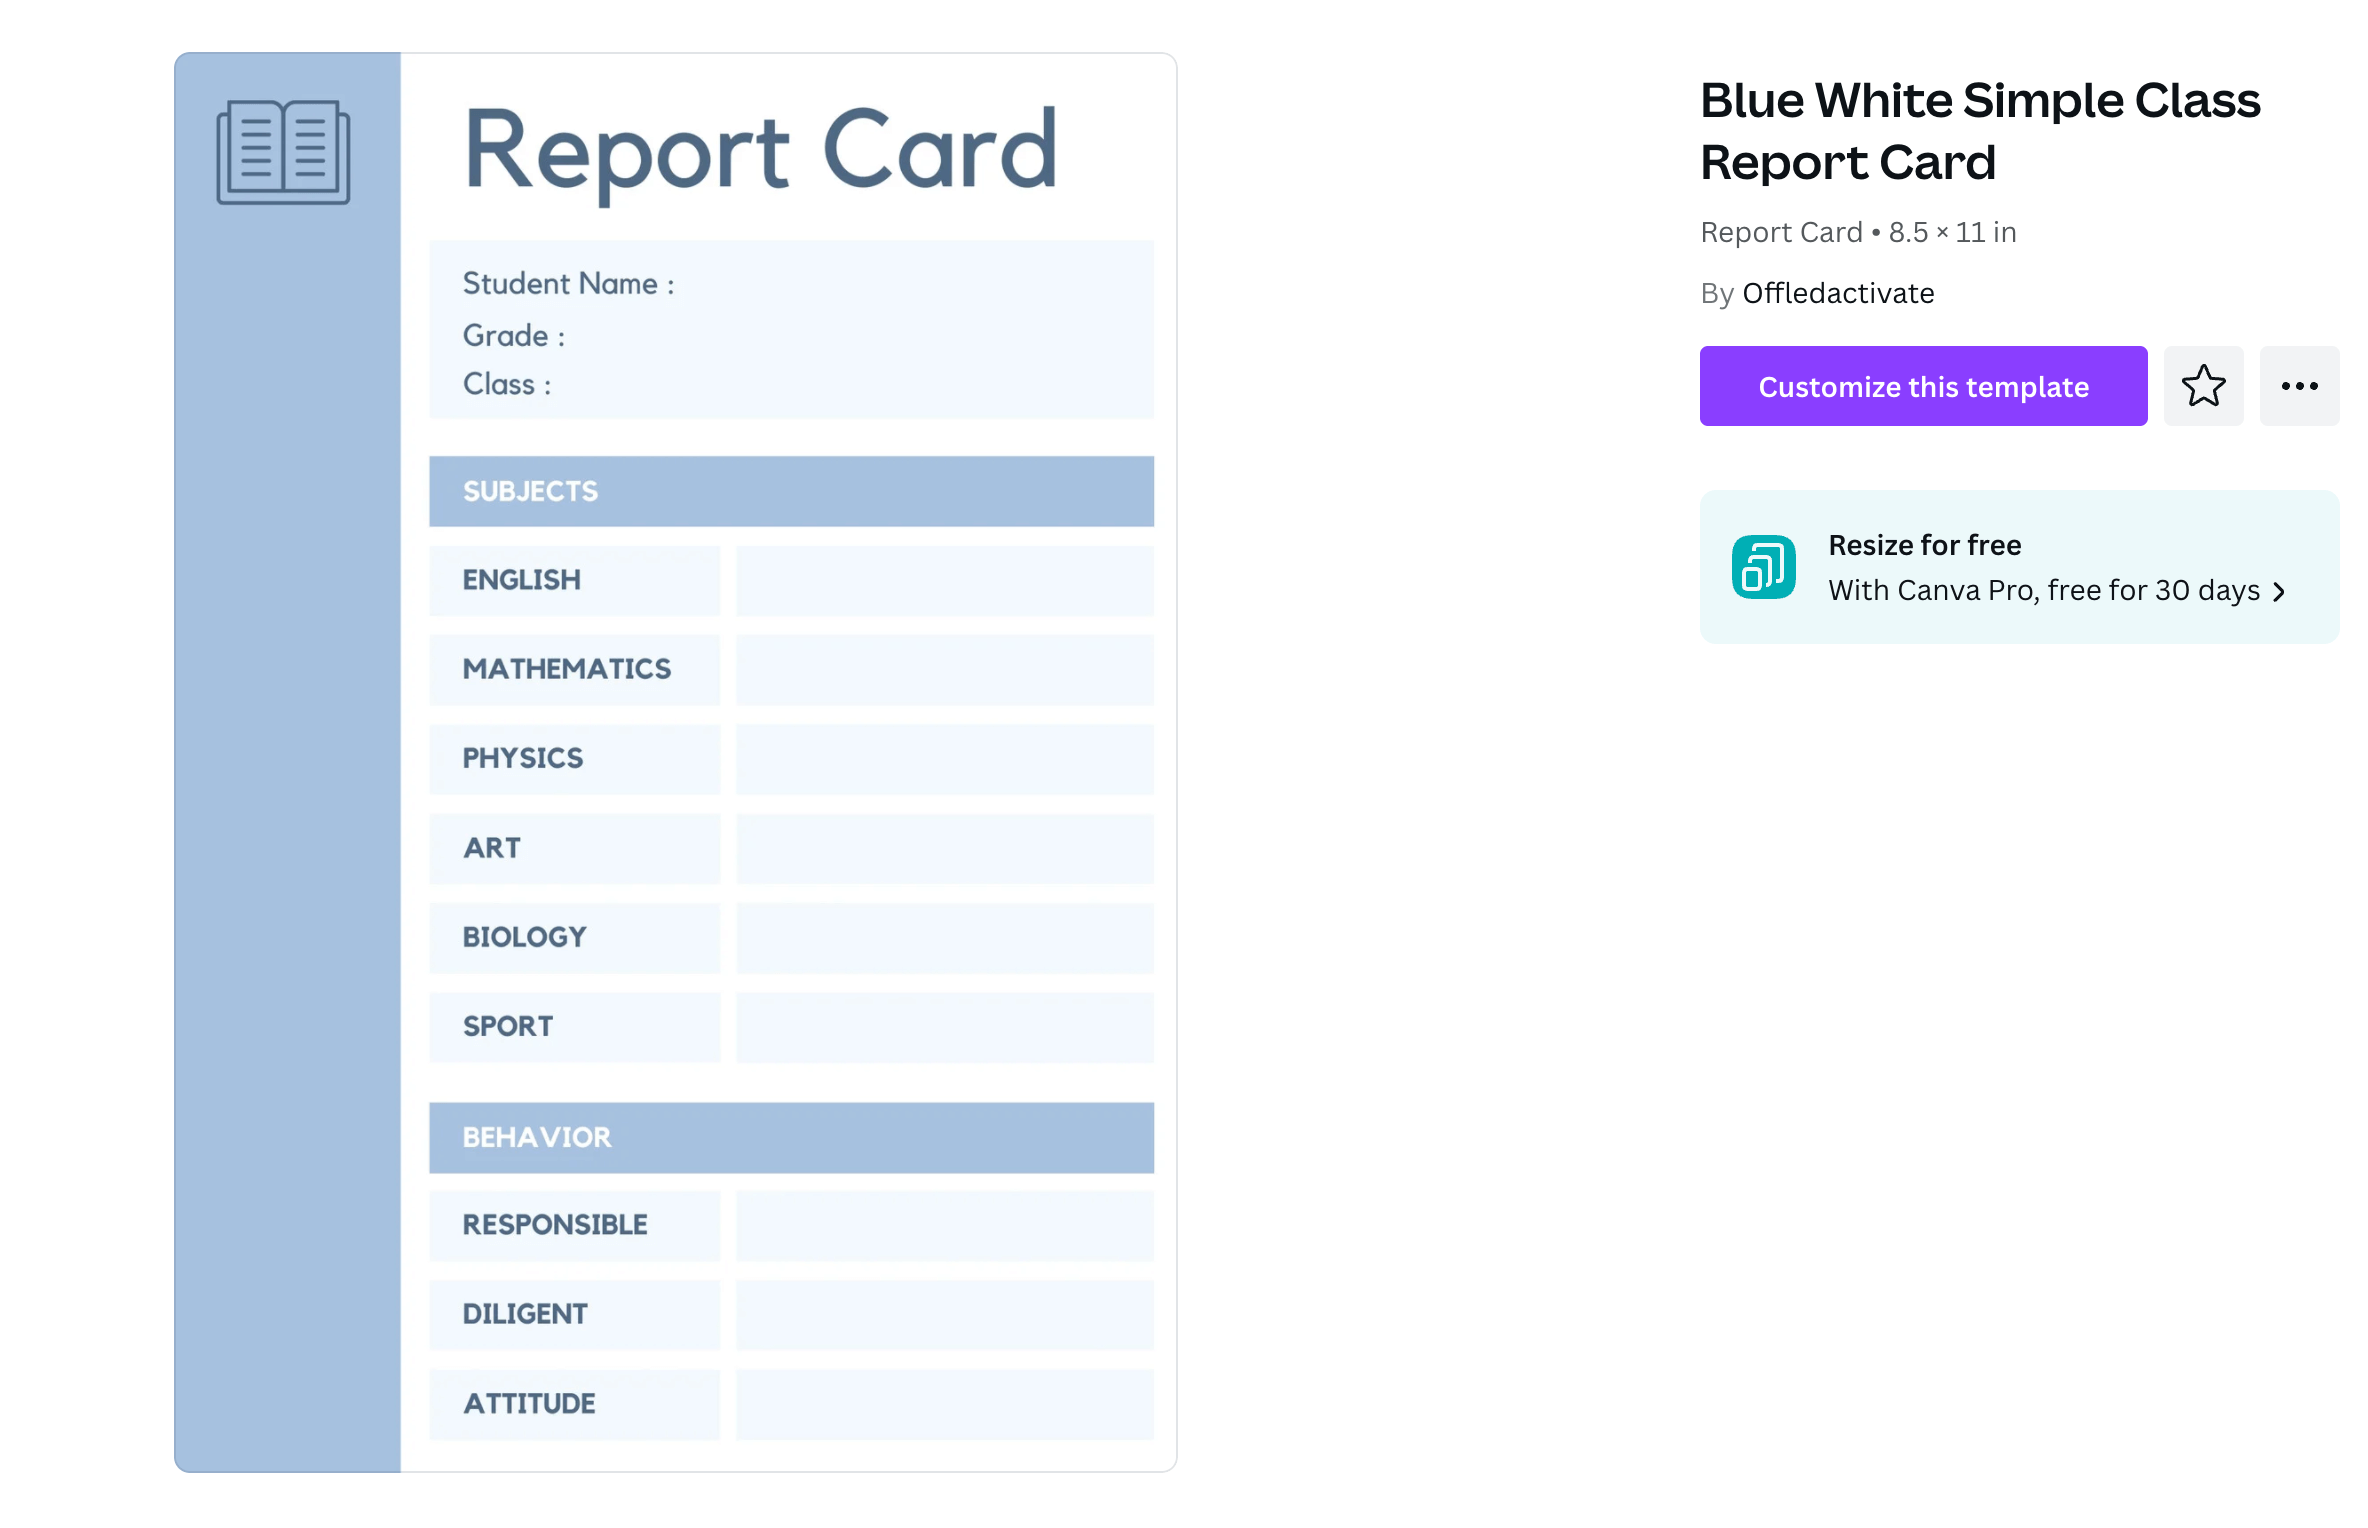 A basic report card template